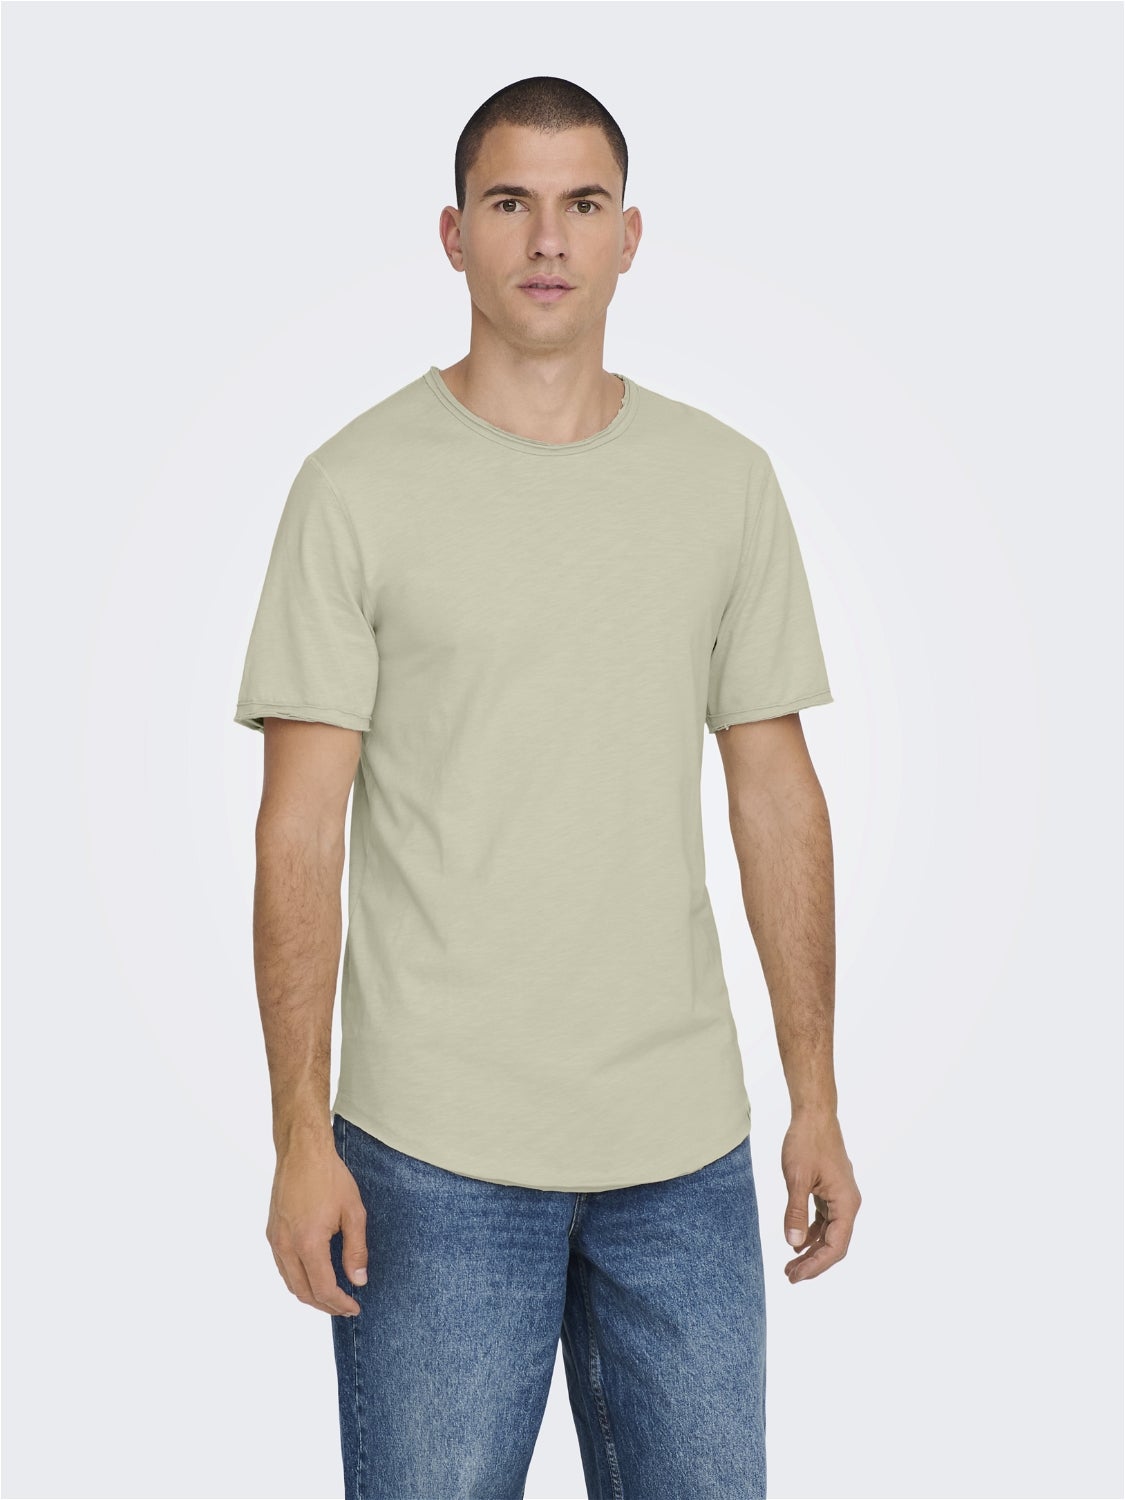 Long Line Fit Round Neck T-Shirt | Light Grey | ONLY & SONS®